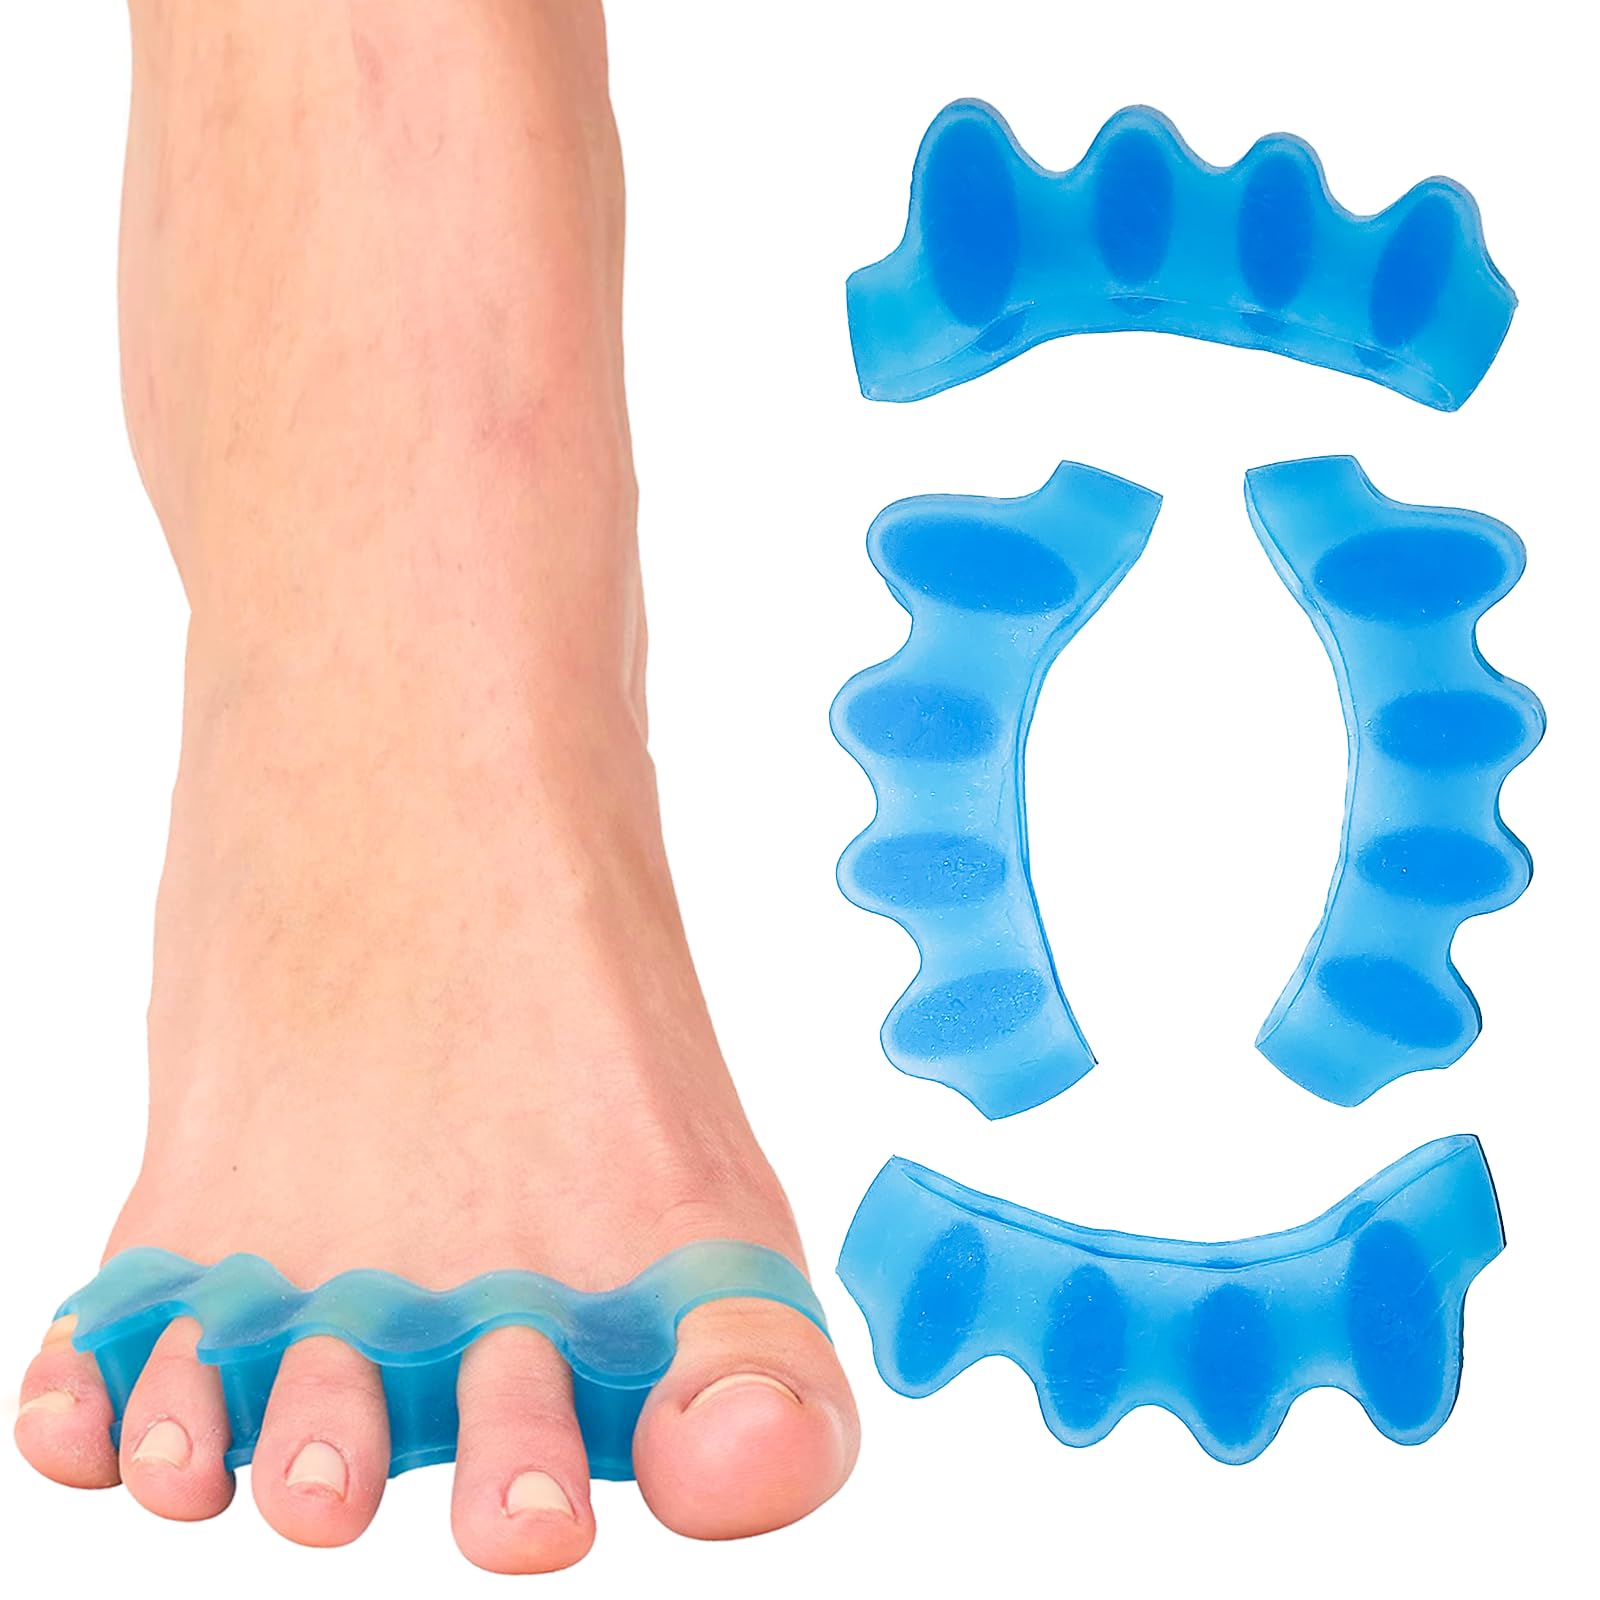 Silicone Toe Separators Straightener Toe Corrector Spacer Spreader  Stretchers for Bunion Hammer Toes Toe Correction 